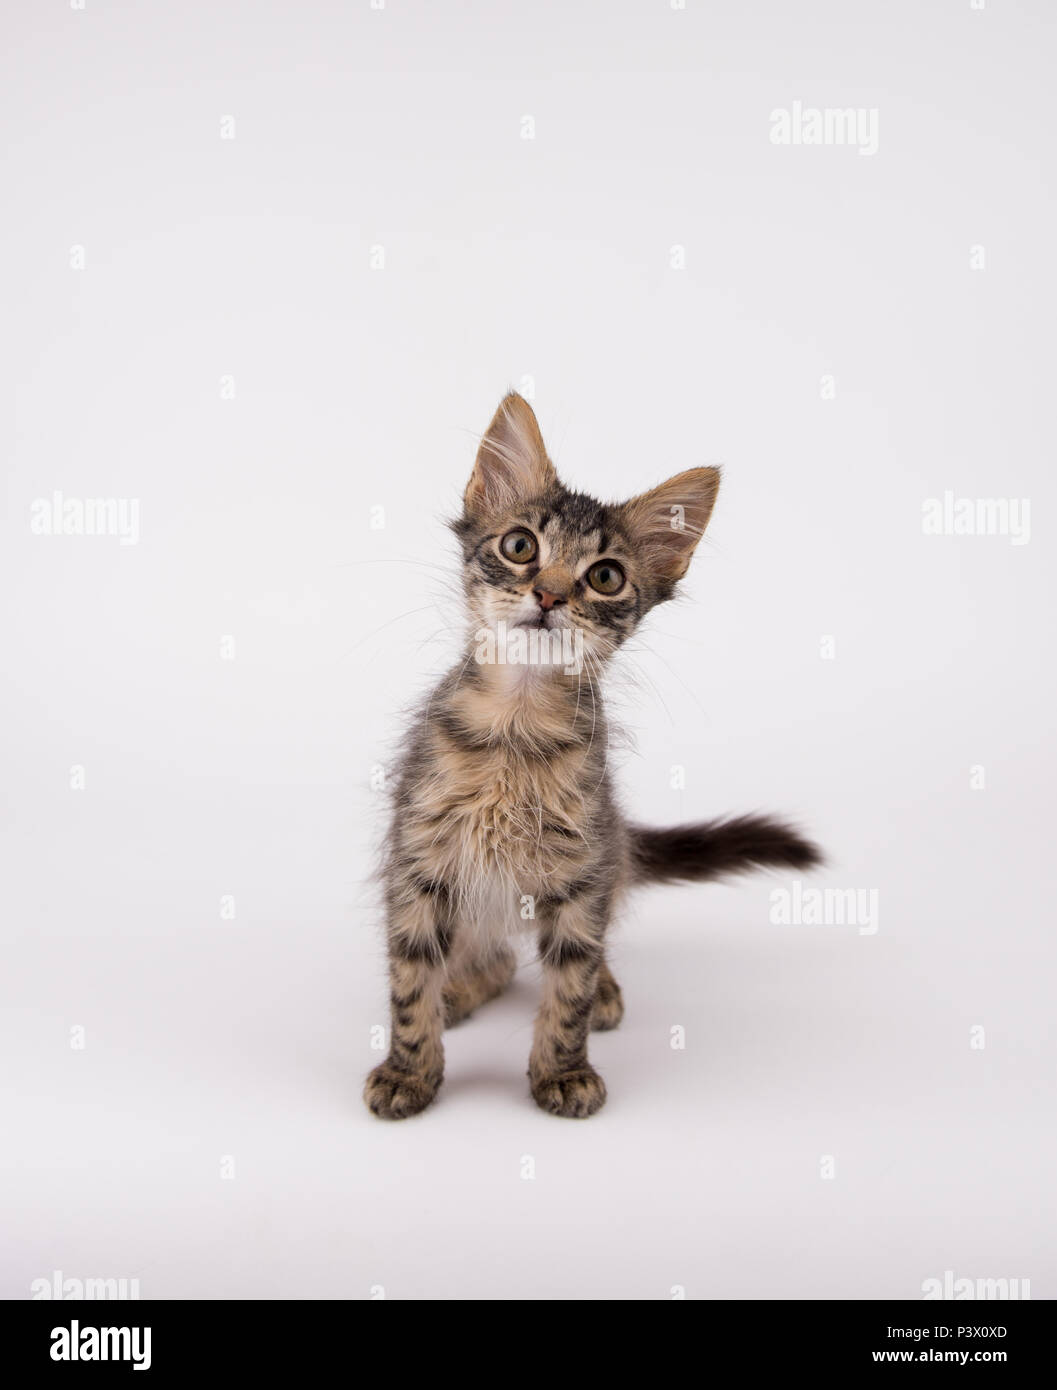 Young Funny Looking Kitten on White Background Stock Photo